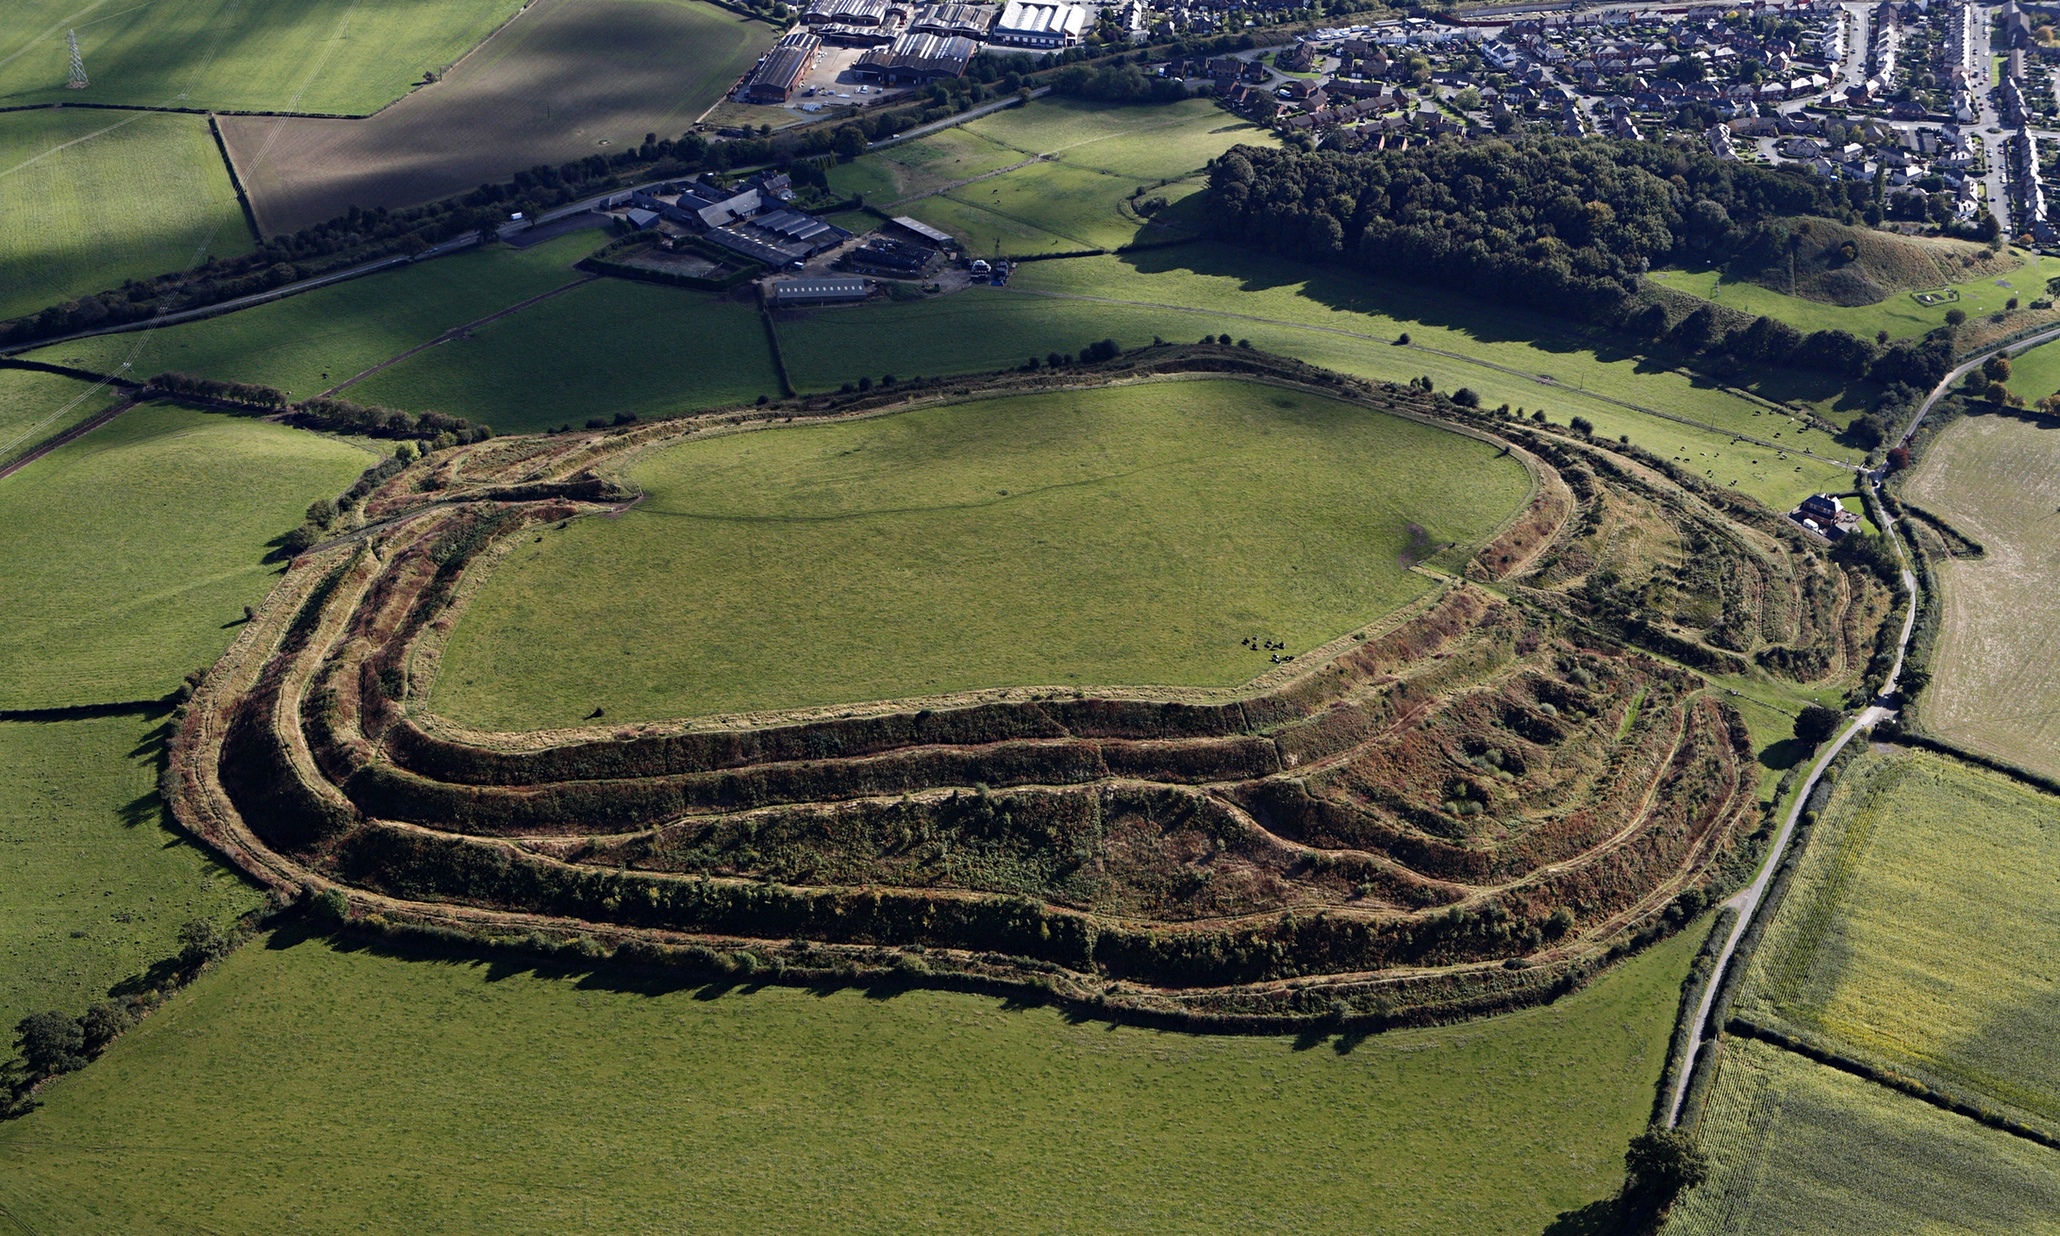 Hill fort said to be where King Arthur’s Guinevere was born has lasted